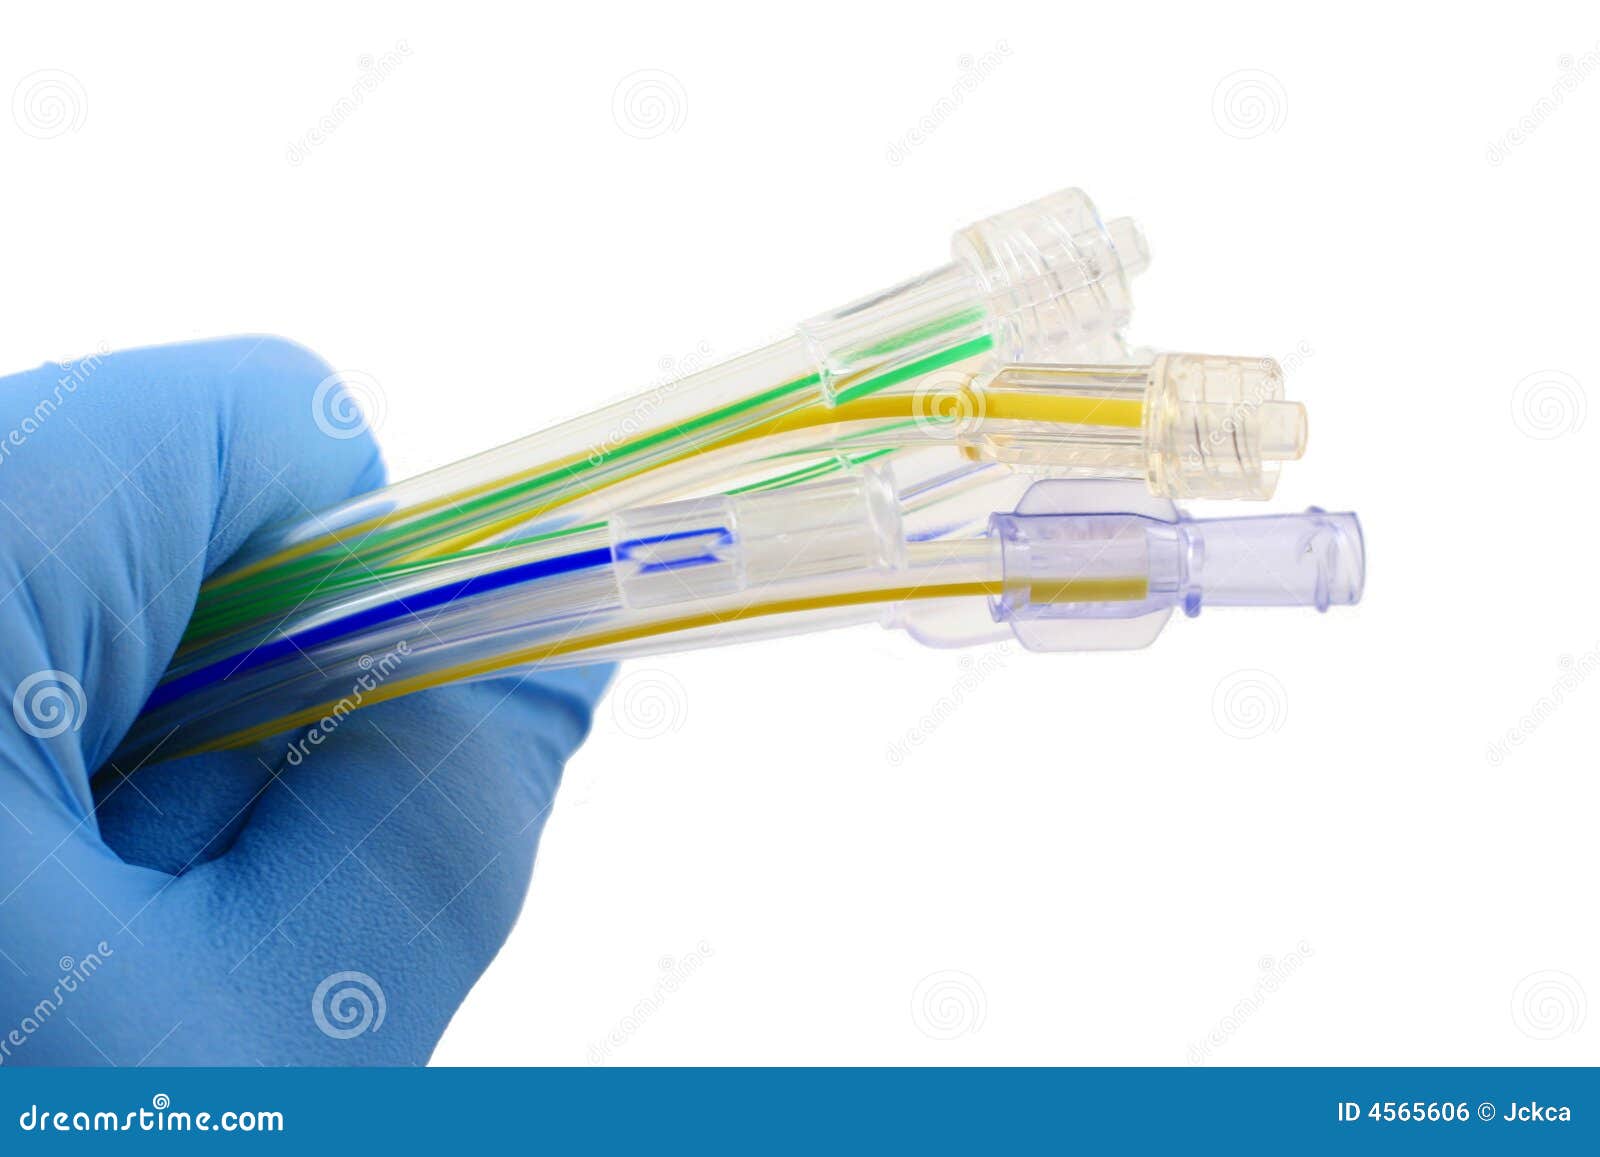 gloved hand holding surgical tubing